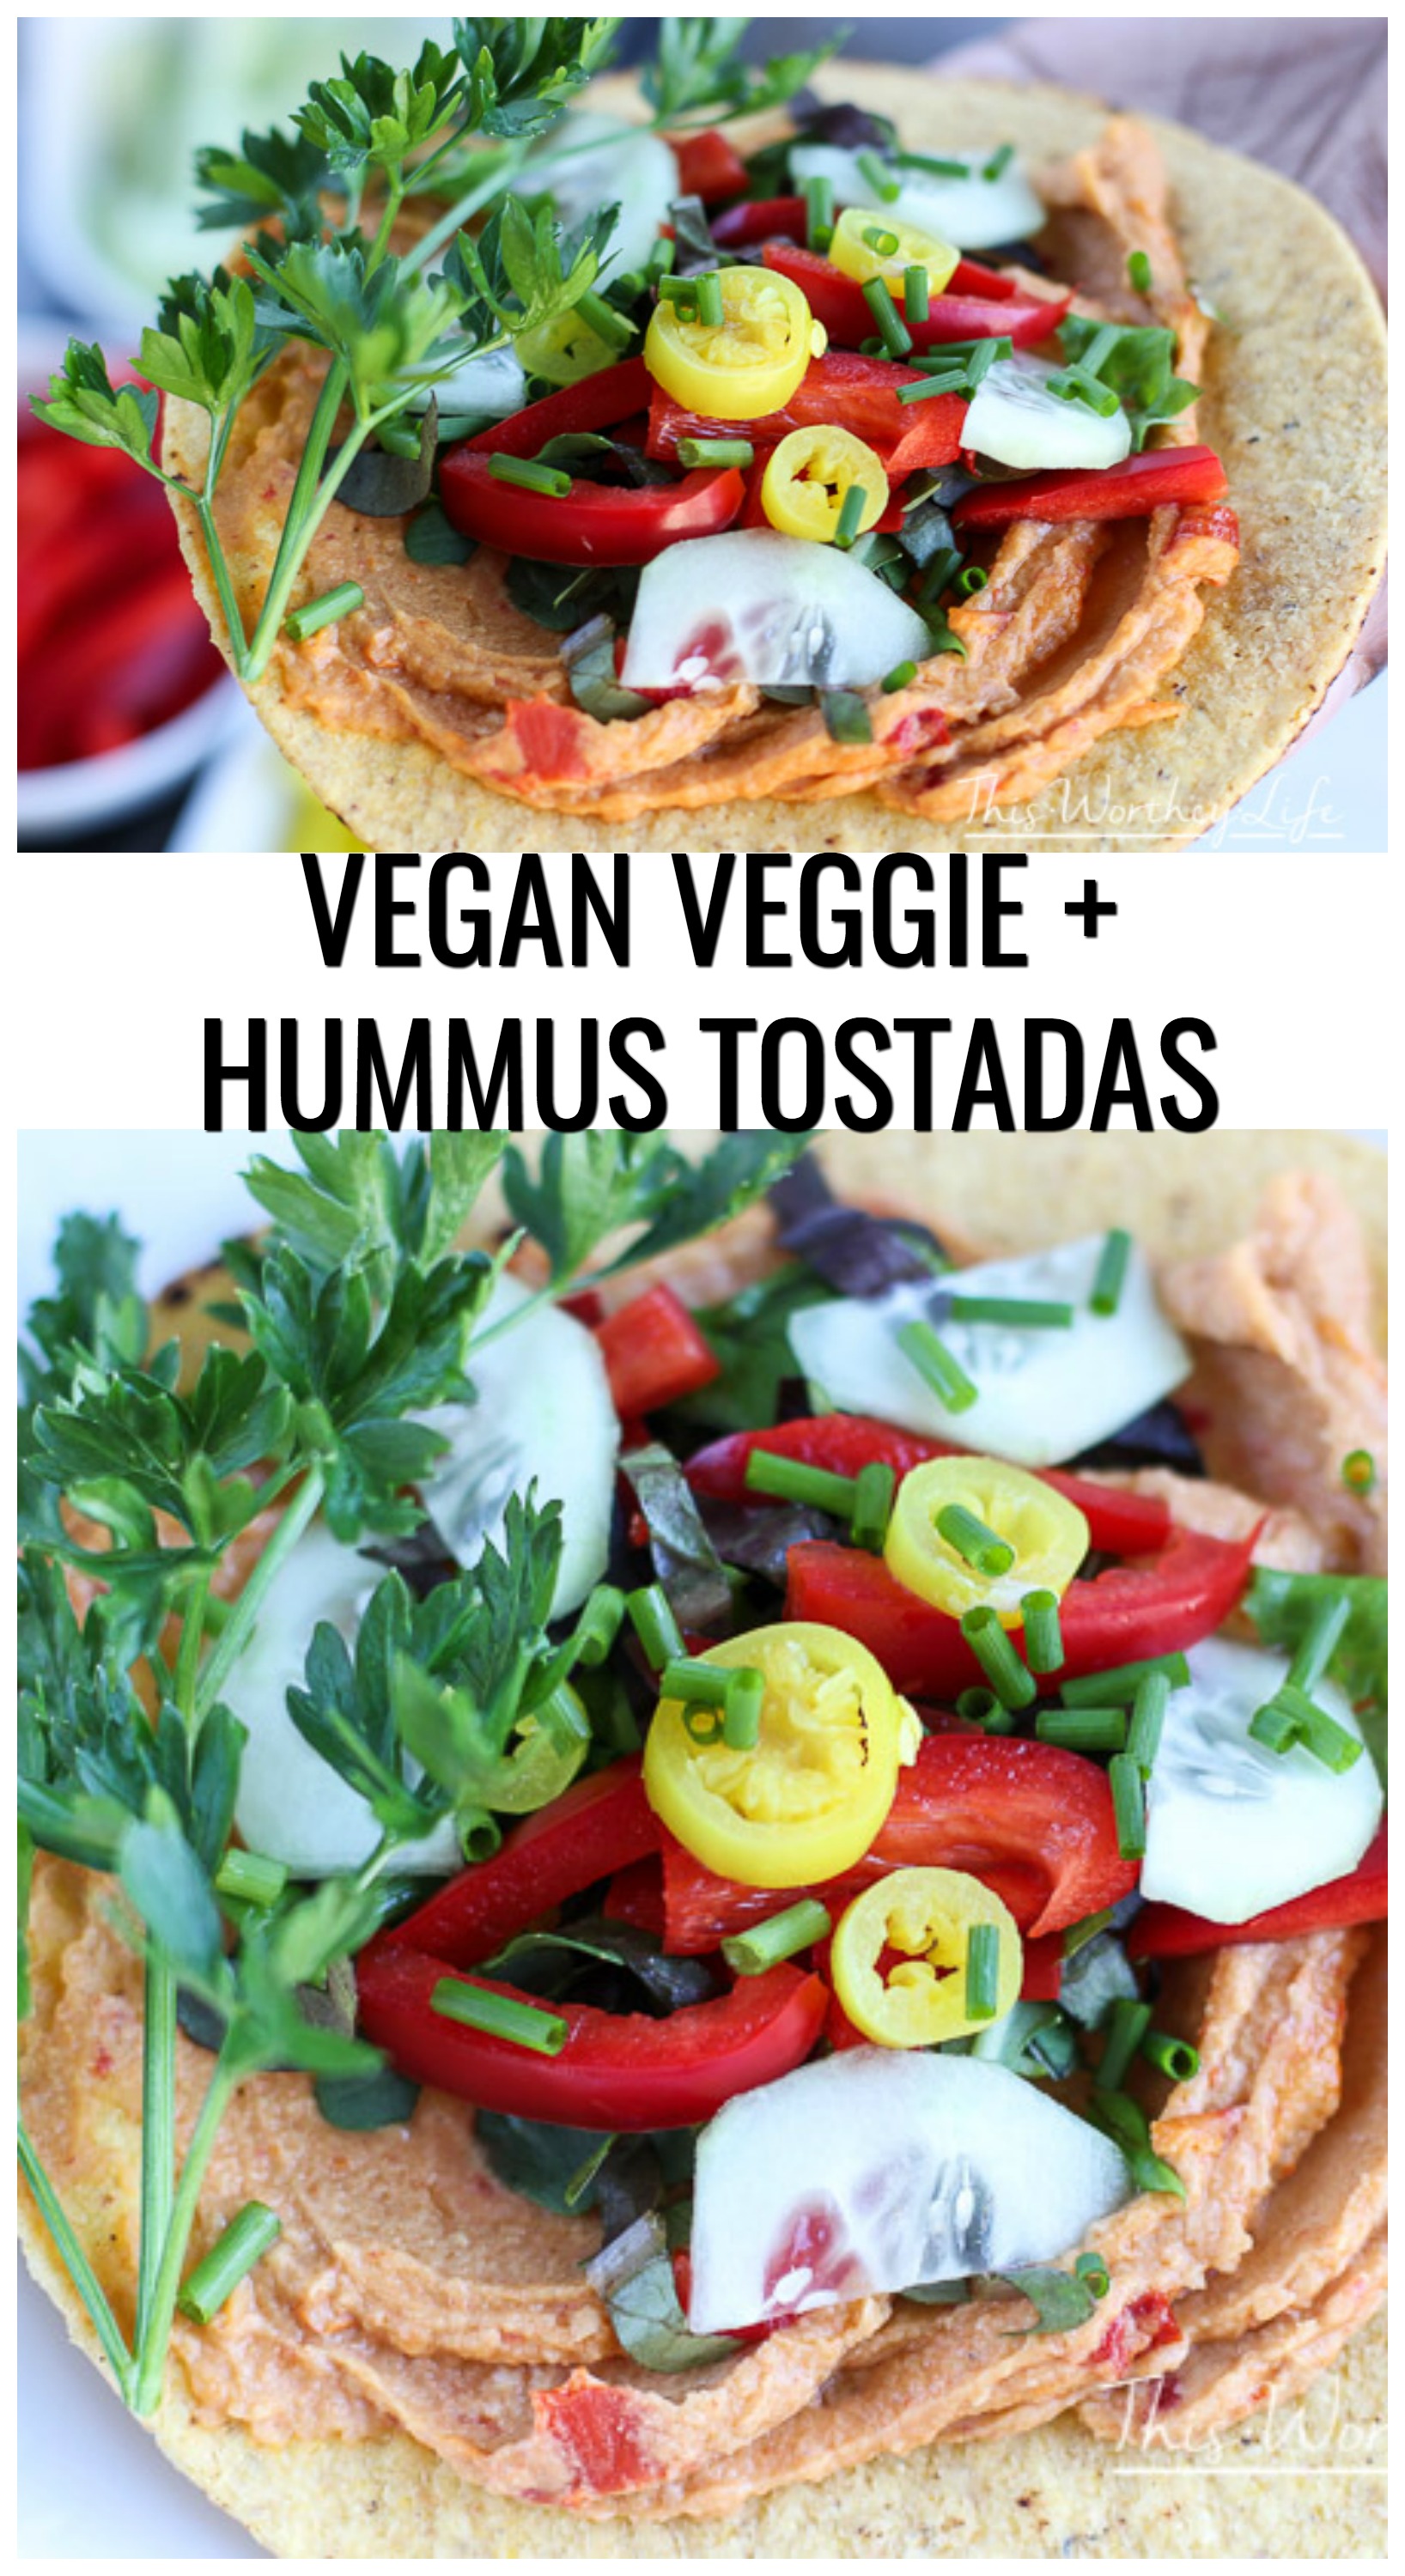 Happy National Hummus Day! Here's an easy hummus recipe to try- Super quick, unbelievably easy and more flavor you know what to do with our Vegan Veggie Hummus Tostadas are the way to go for a quick meal or healthy snack. 